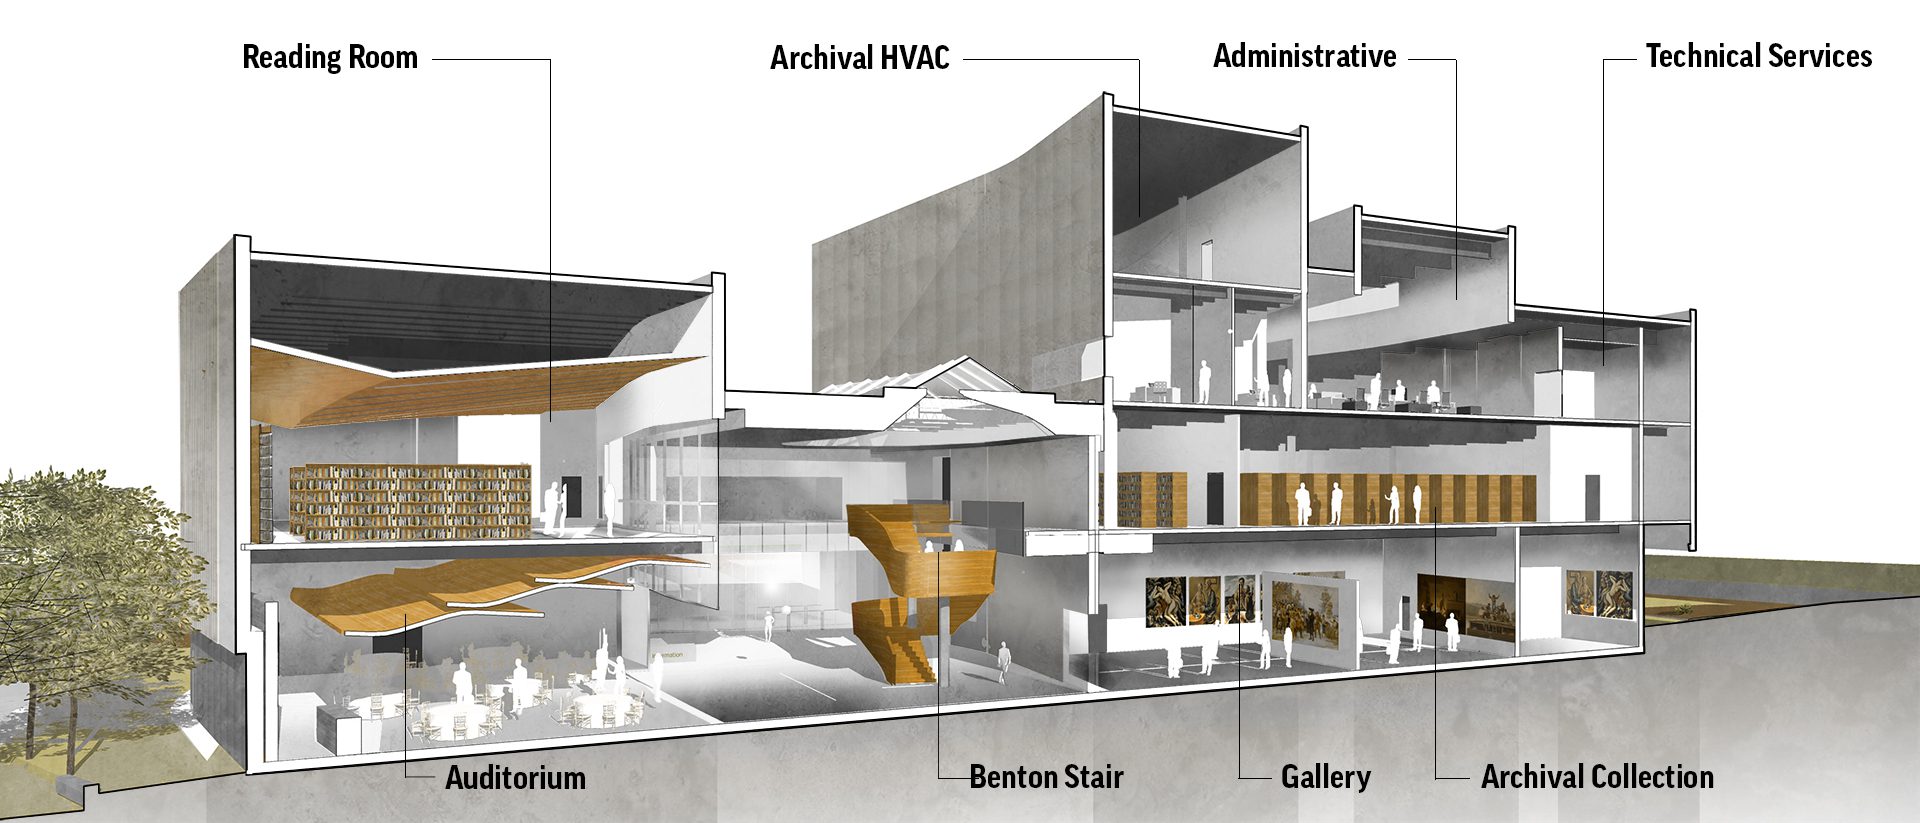 Section diagram of the building's programming.